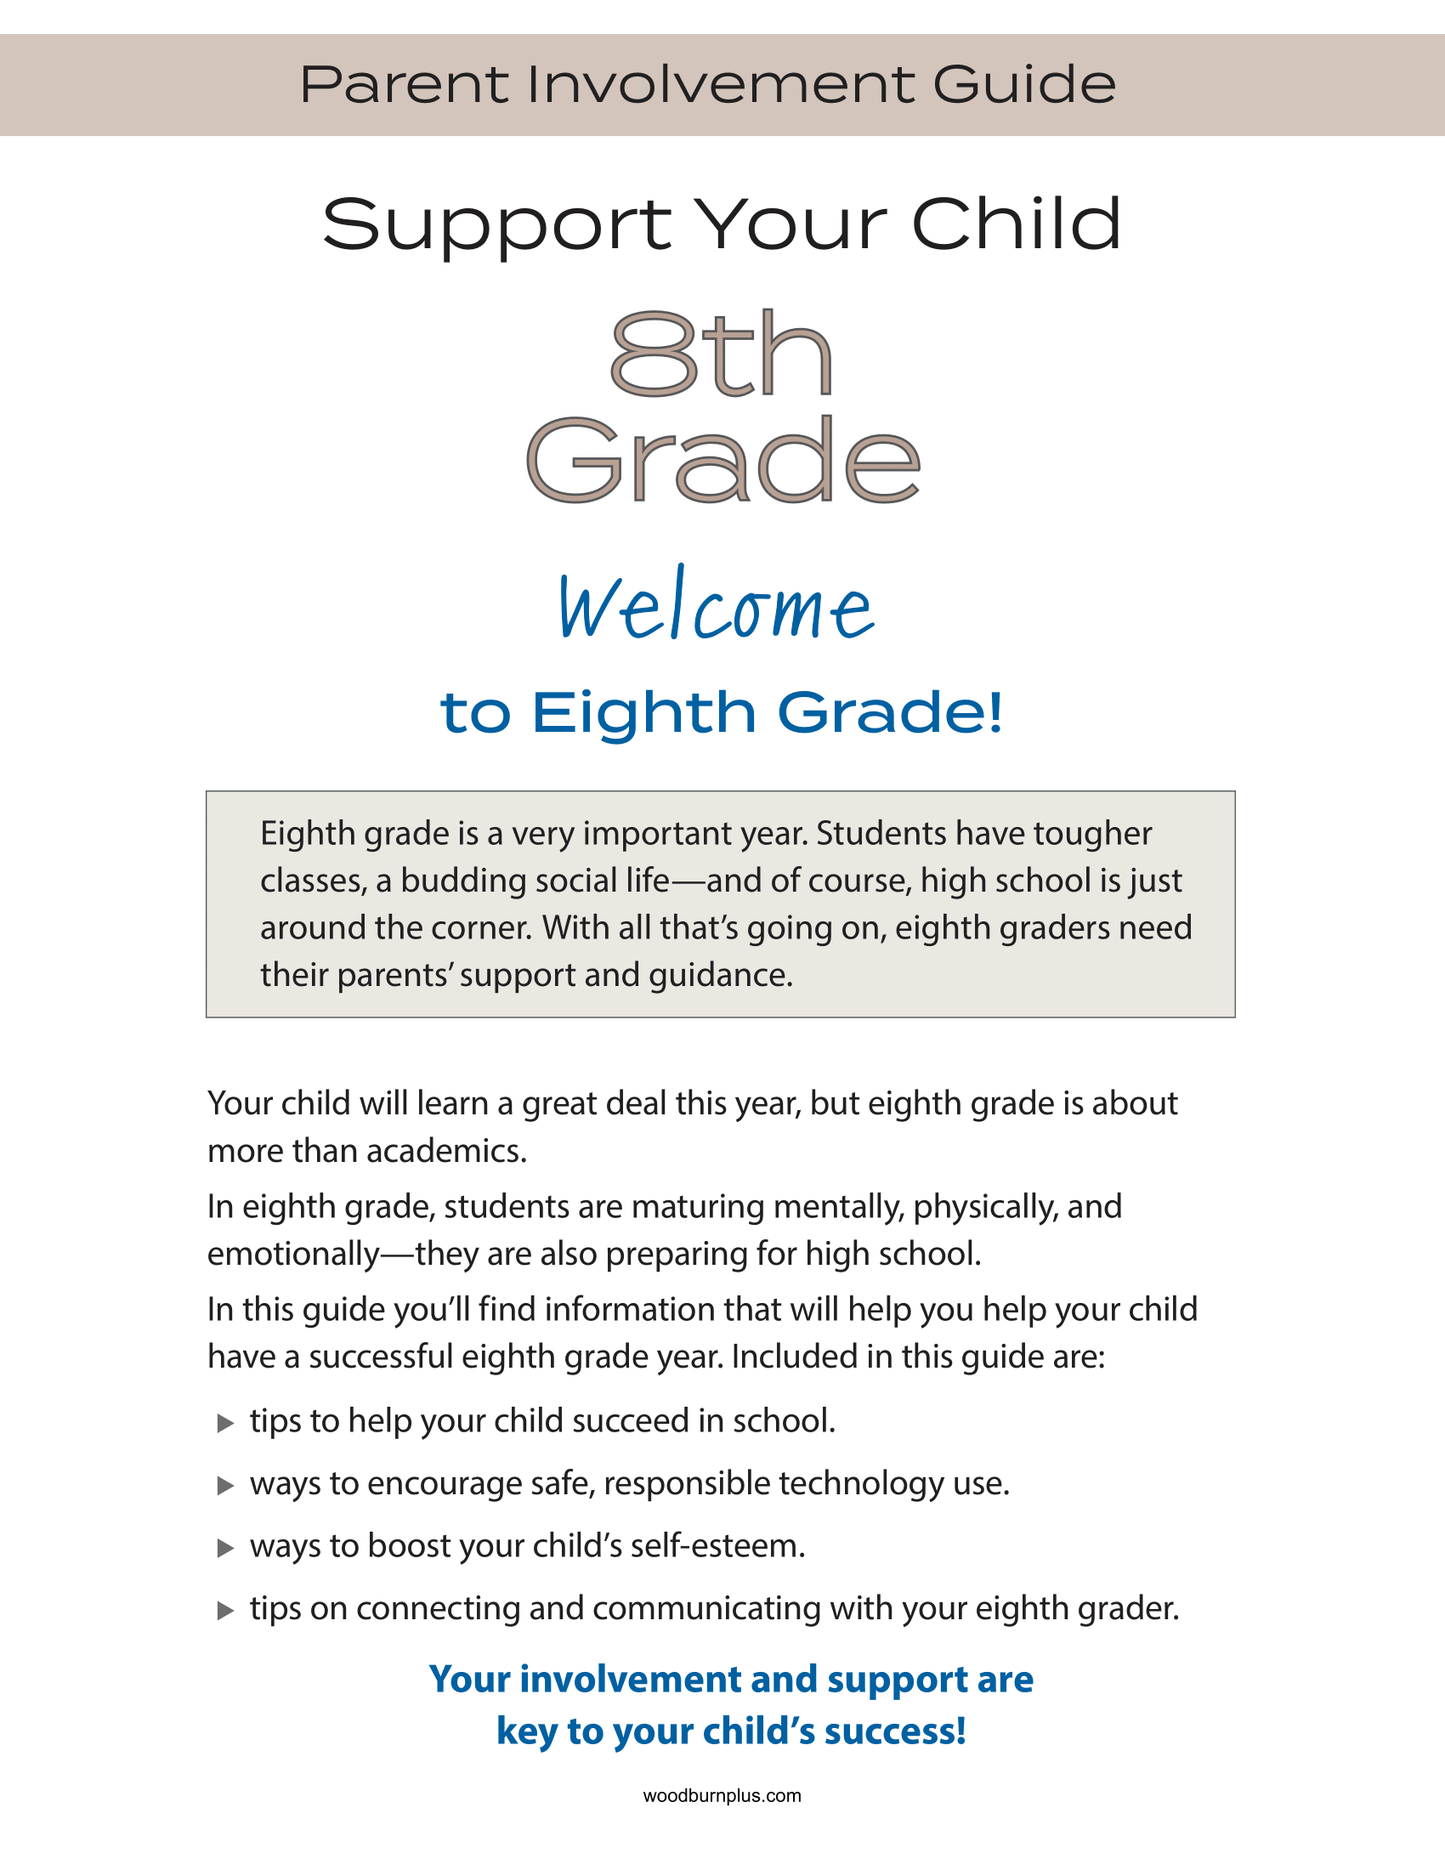 Support Your Child - 8th Grade